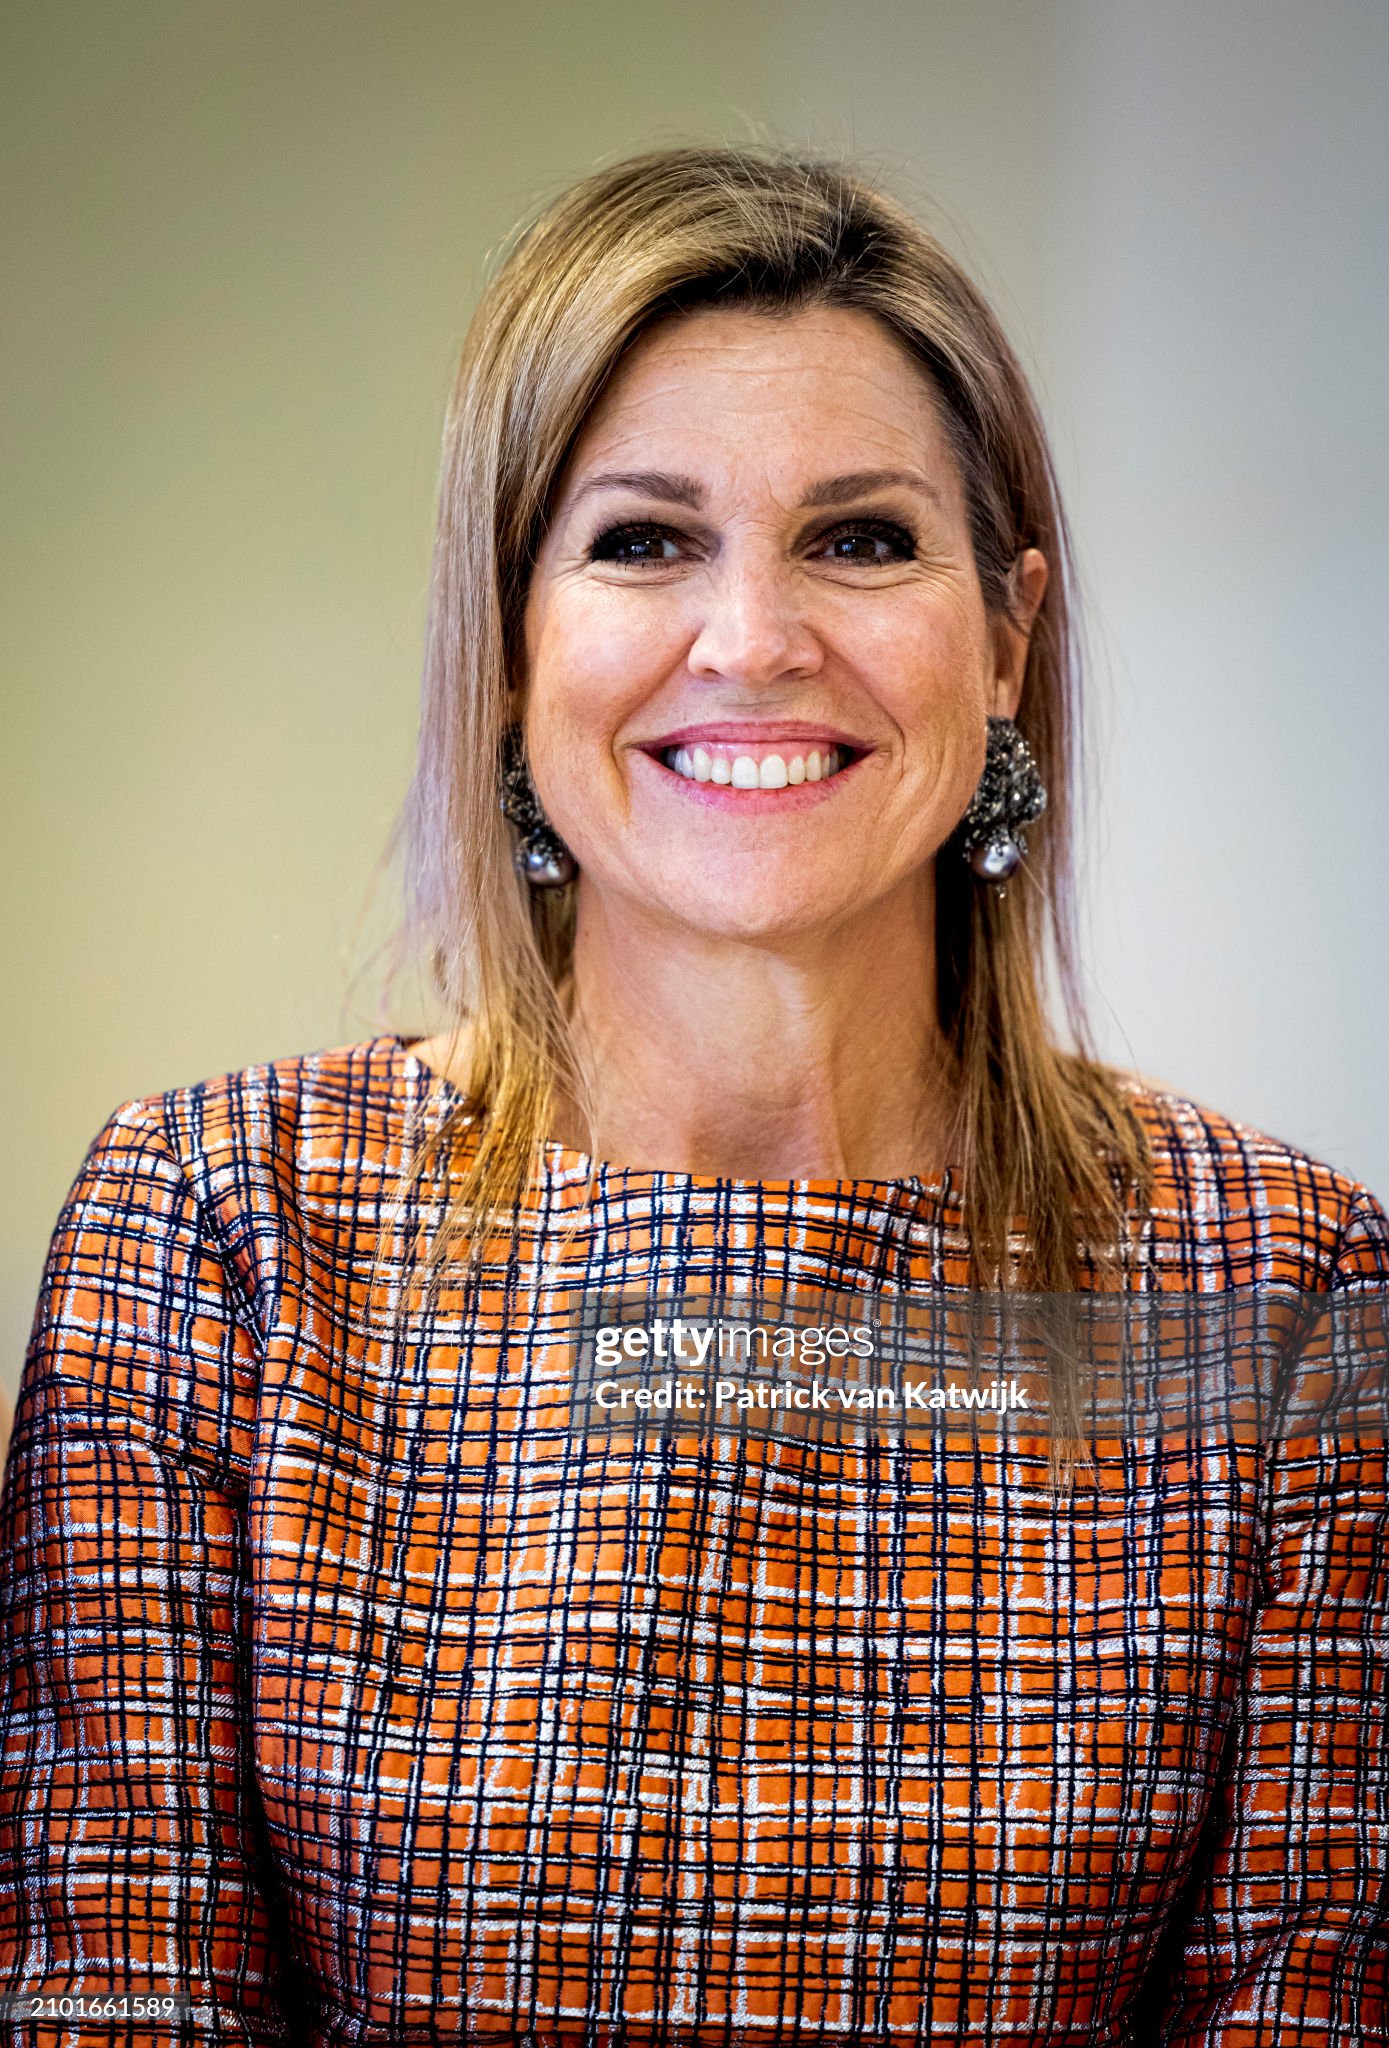 queen-maxima-of-the-netherlands-visits-mindus-project-in-amsterdam.jpg?s=2048x2048&w=gi&k=20&c=6msrMT79AXX_NWC8xpMr4DjoEabeZL2lqONzHFE6hmM=